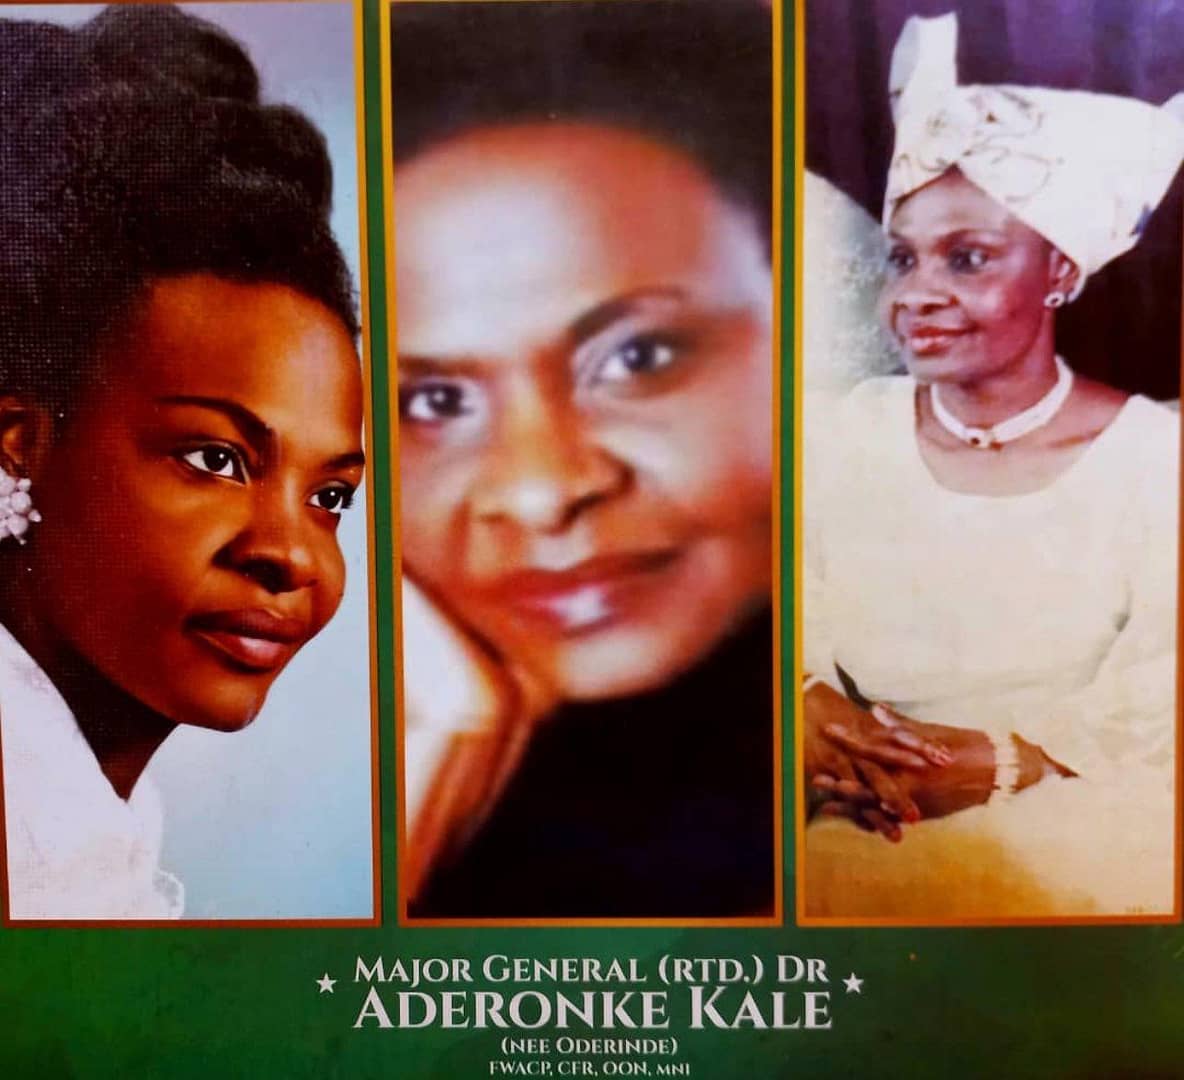 Nigeria’s first female Major General, Kale laid to rest